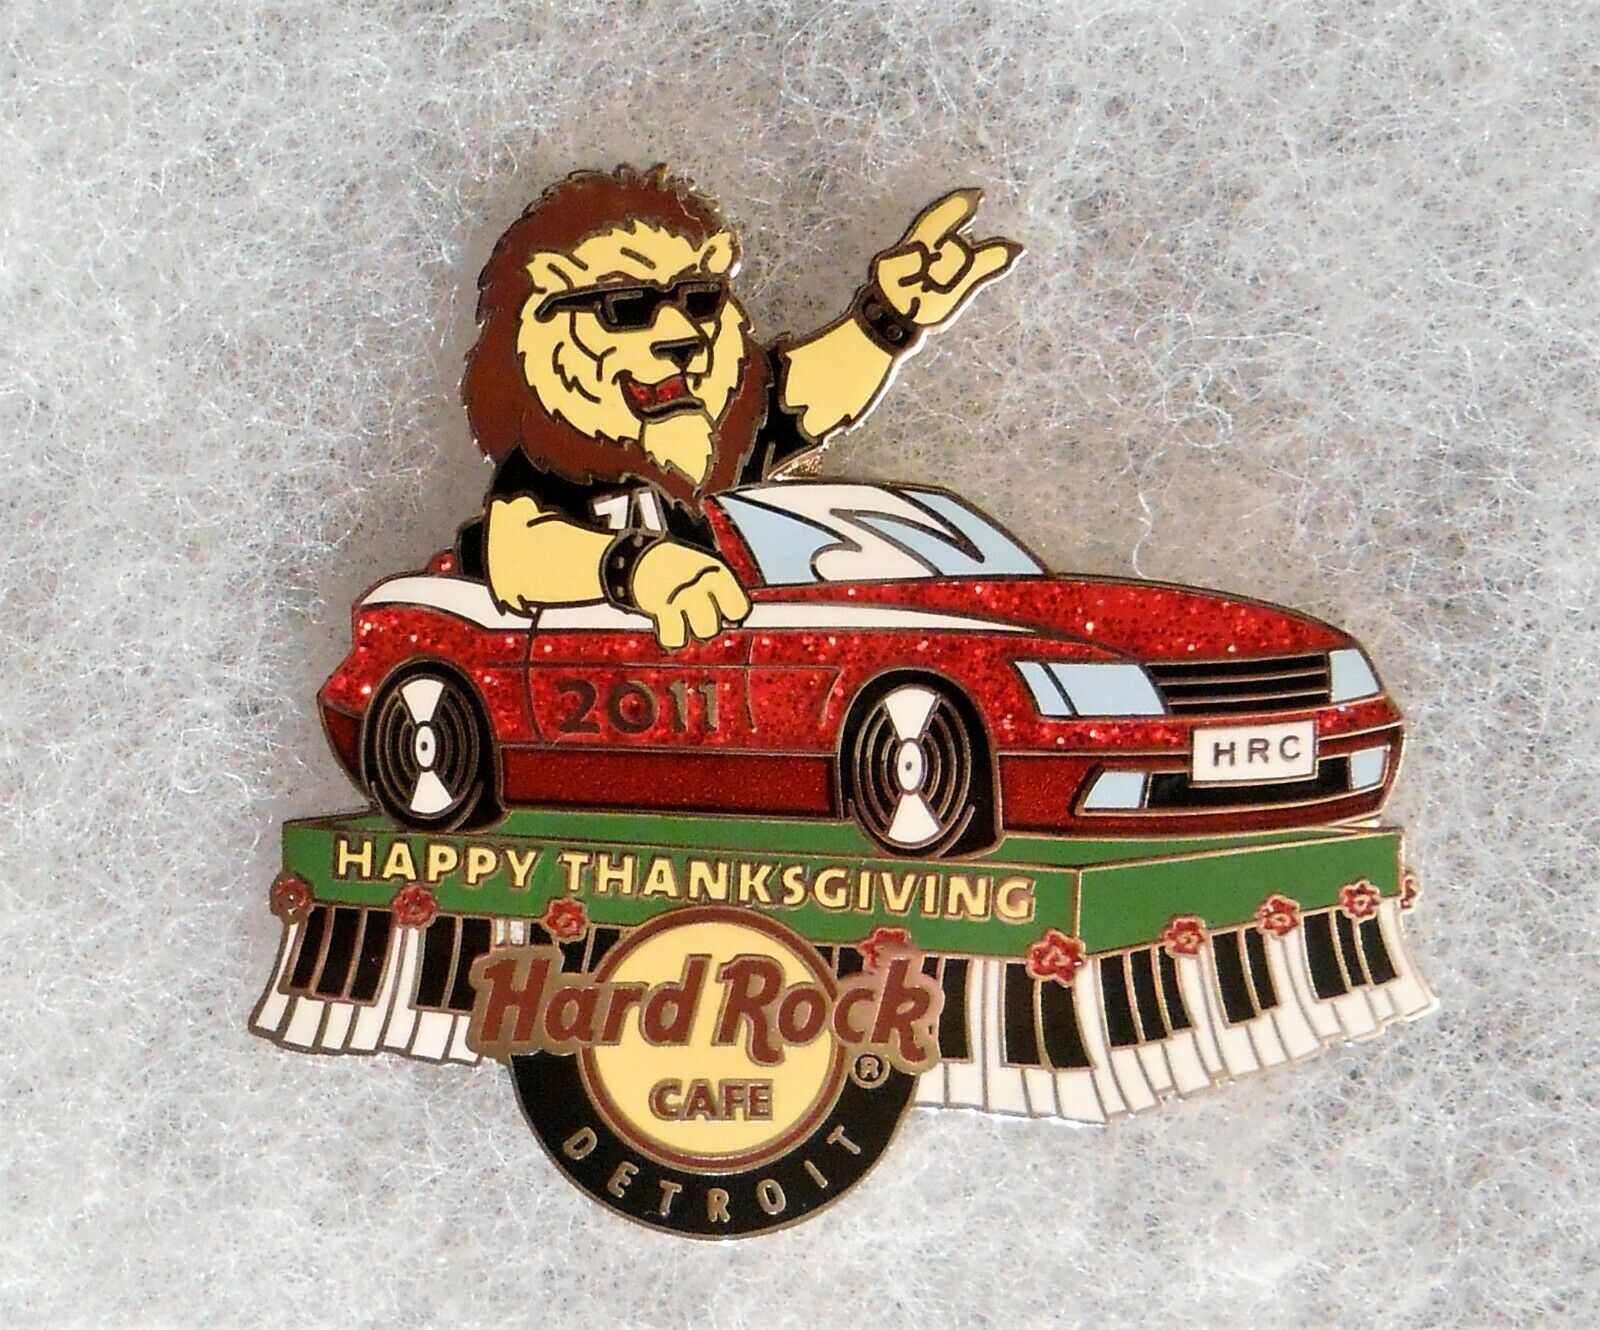 Hard Rock Cafe Detroit Lion Riding In Red Sports Car Parade Float Pin # 64064